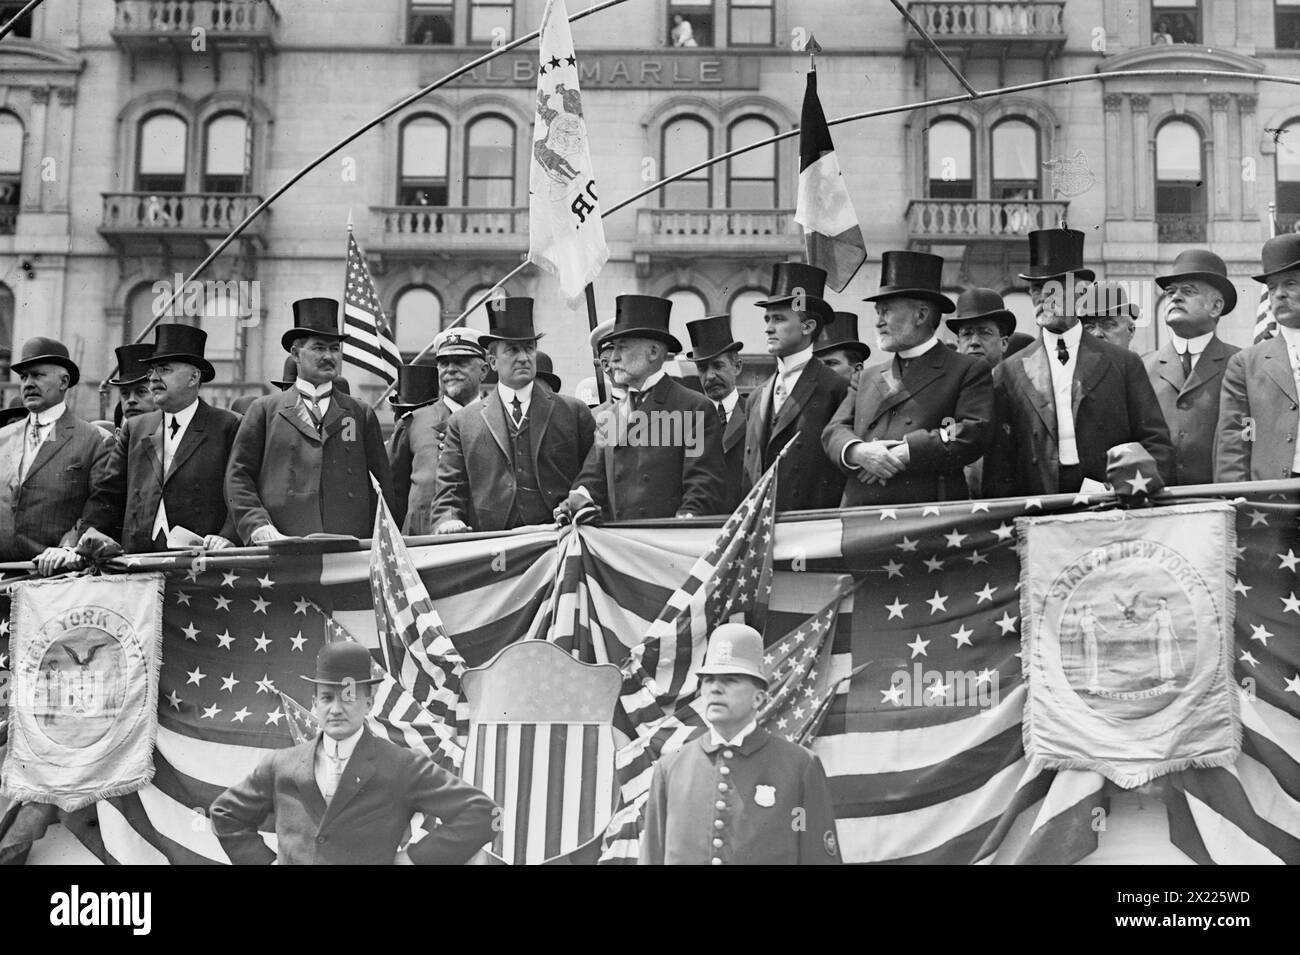 Dougherty, Dix, Gaynor, Cropsey, Gen. Grant, between 1910 and 1915. Shows George Samuel Daugherty, John Alden Dix, Governor of New York; New York Mayor William Jay Gaynor, Police Commissioner James A. Cropsey and General Frederick Dent Grant. Stock Photo